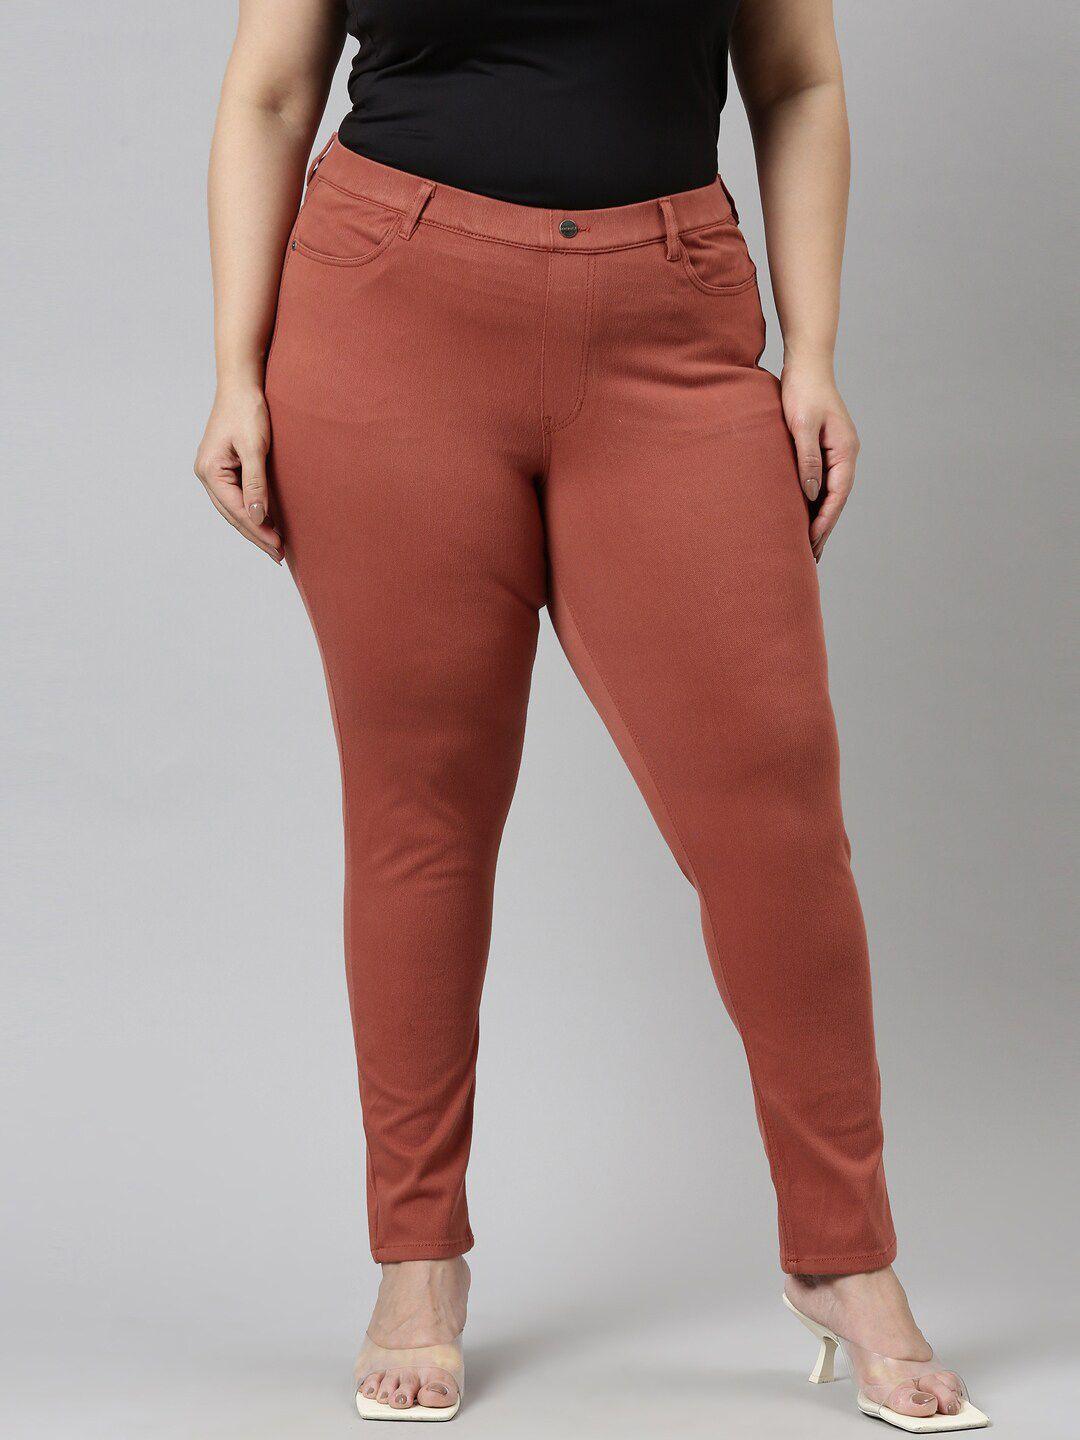 go-colors-women-rust-colored-solid-slim-fit-jeggings